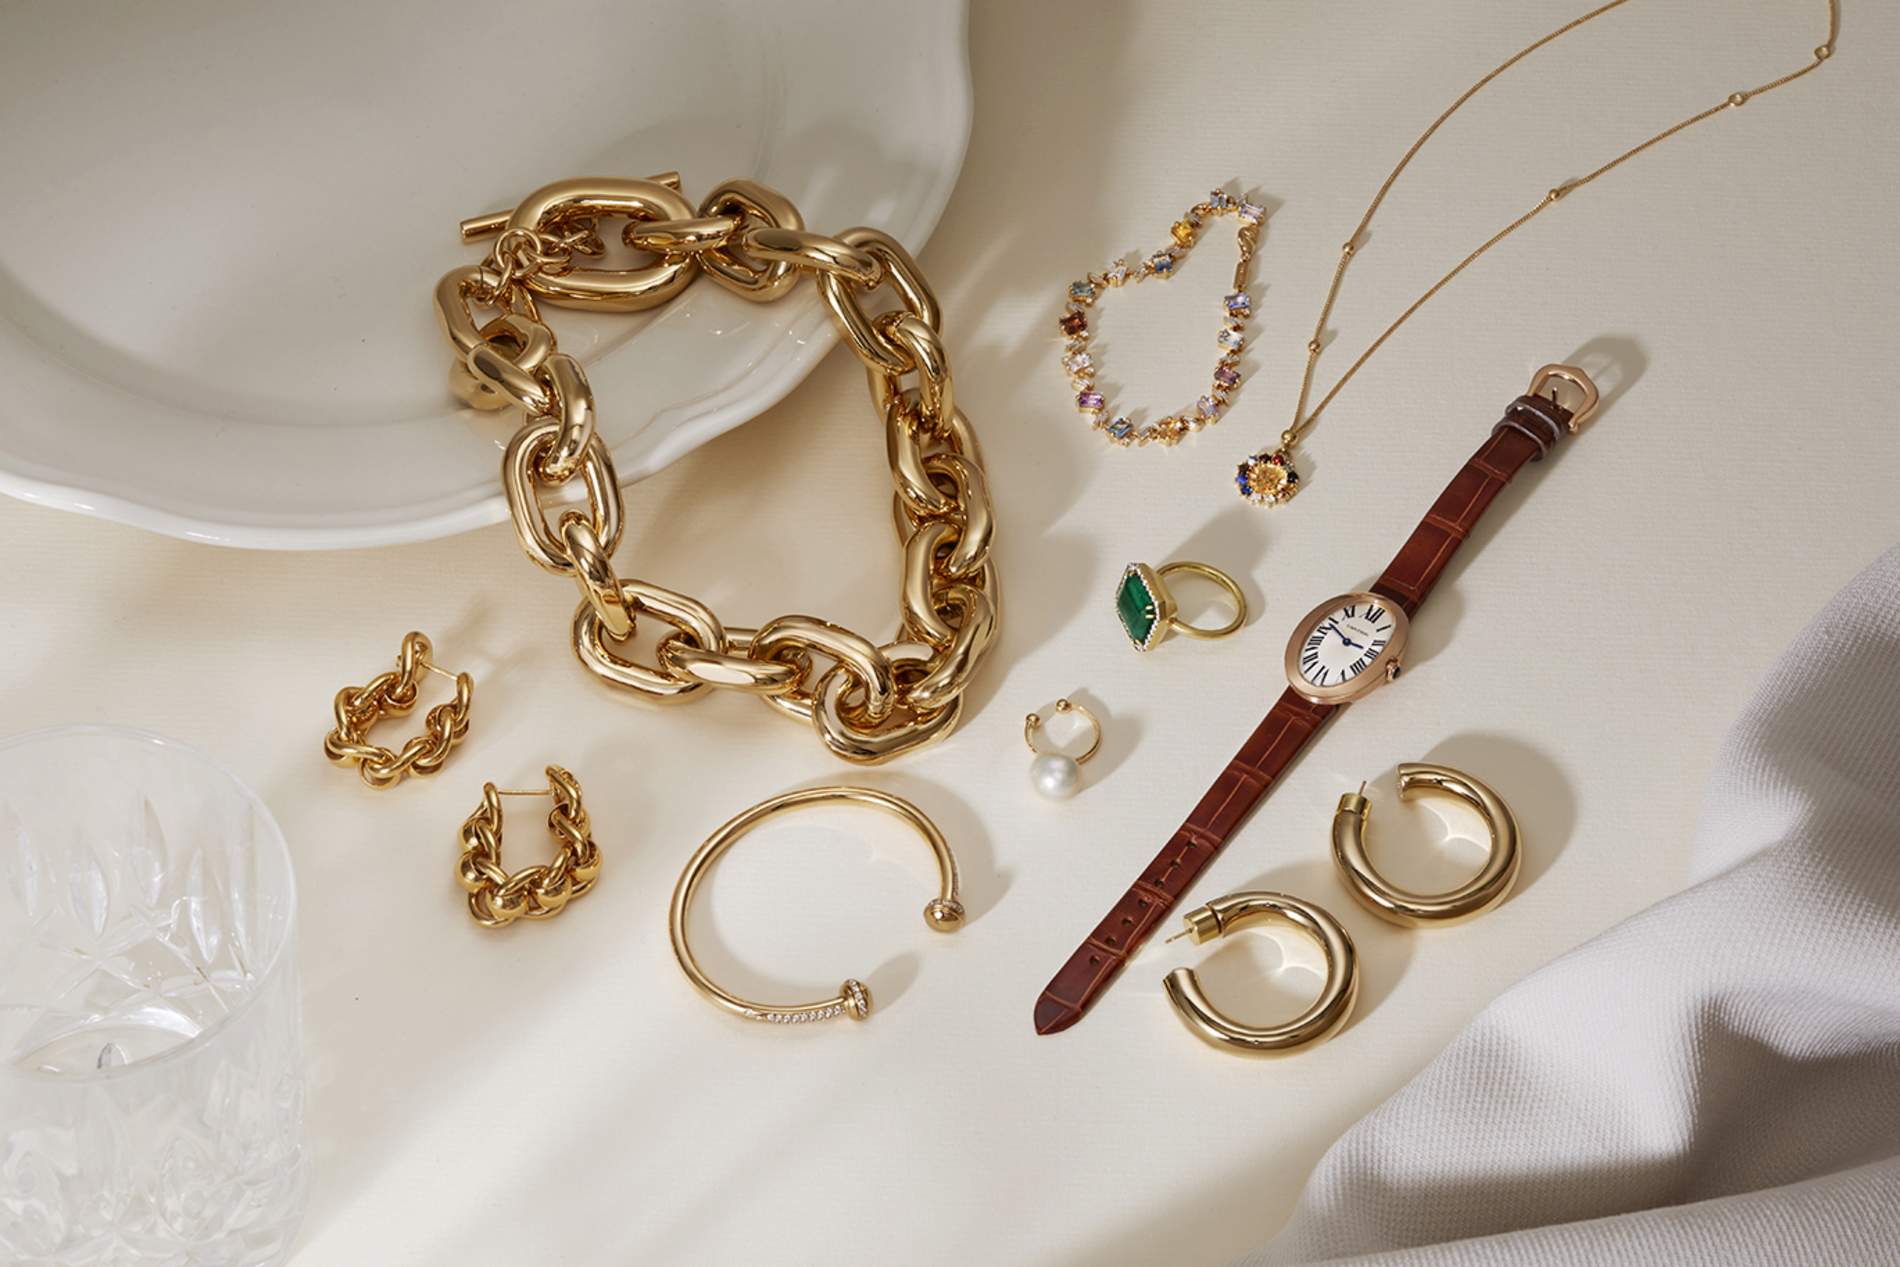 Learn about cartier's fine jewelry making techniques